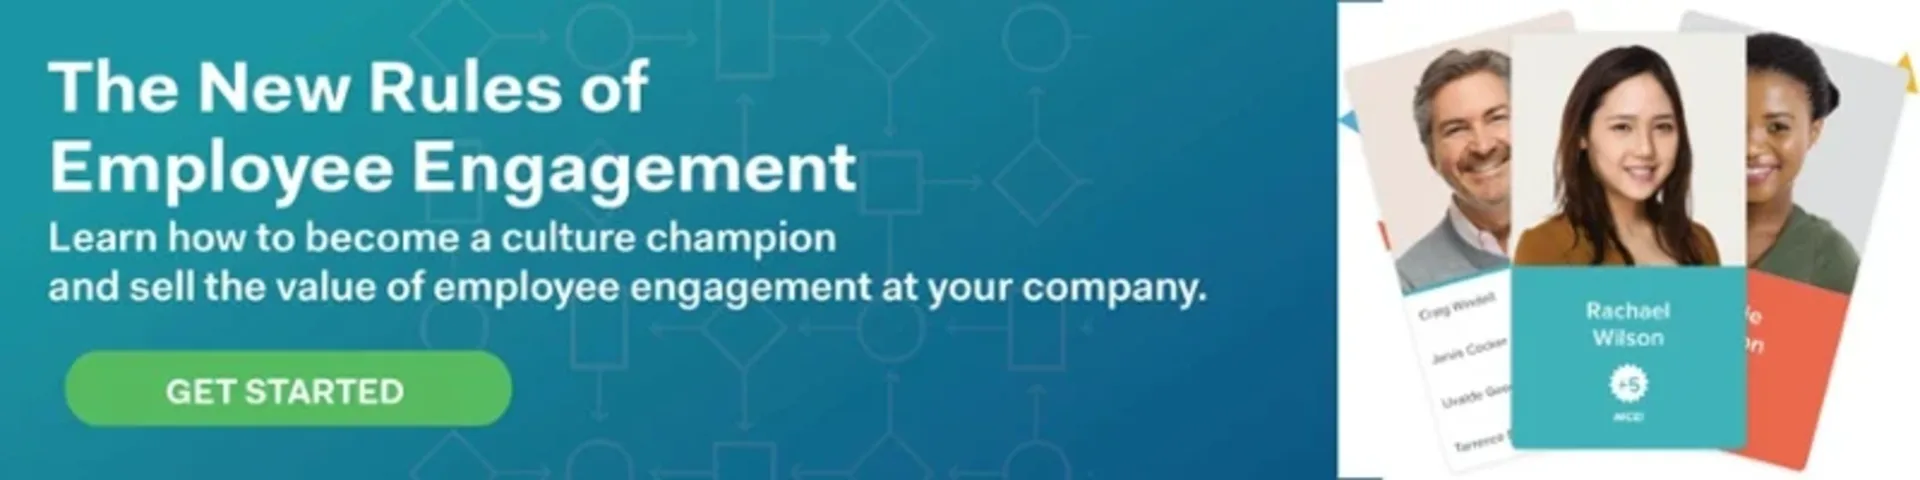 The new rules of employee engagement. Learn how to become a culture champion and sell the value of employee engagement at your company. Get Started.